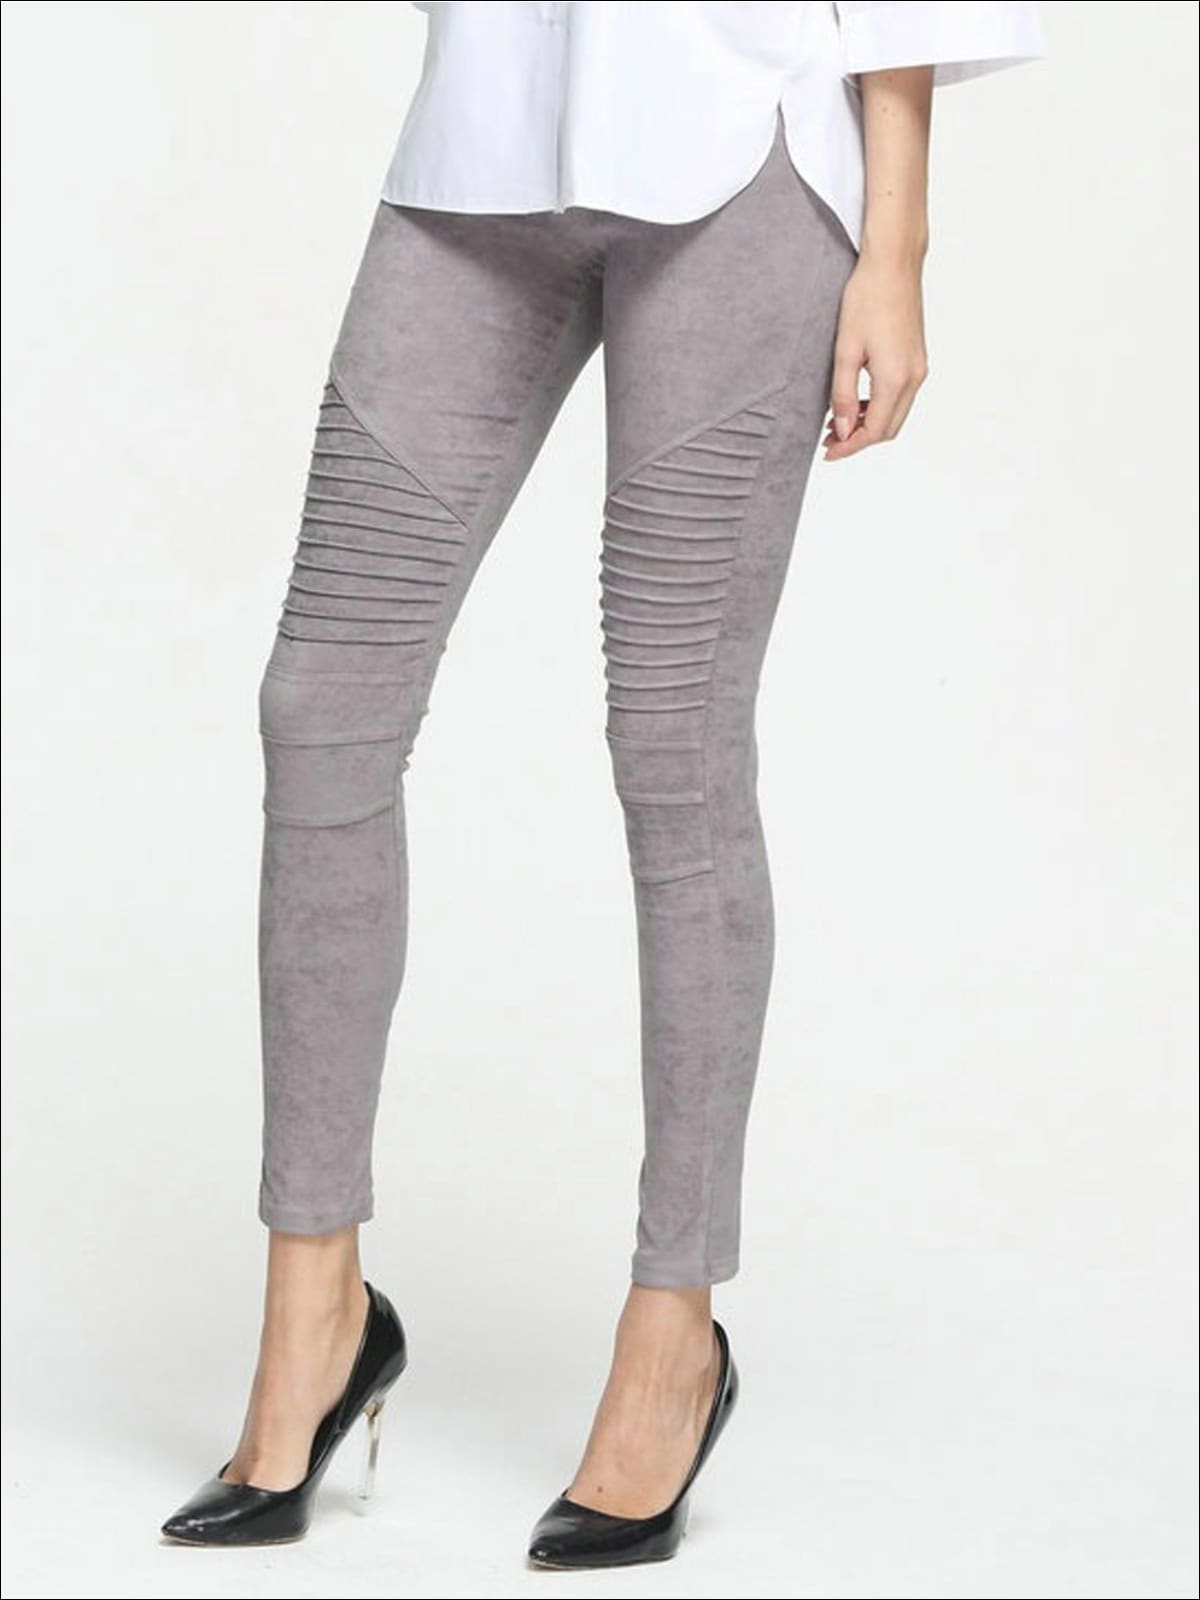 https://cdn.shopify.com/s/files/1/0996/1812/products/womens-fashion-faux-suede-moto-pants-grey-xs-20-39-99-40-59-afterchristmas-bfcutoff-black-bottoms-mia-belle-overseas-fulfillment-baby_676.jpg